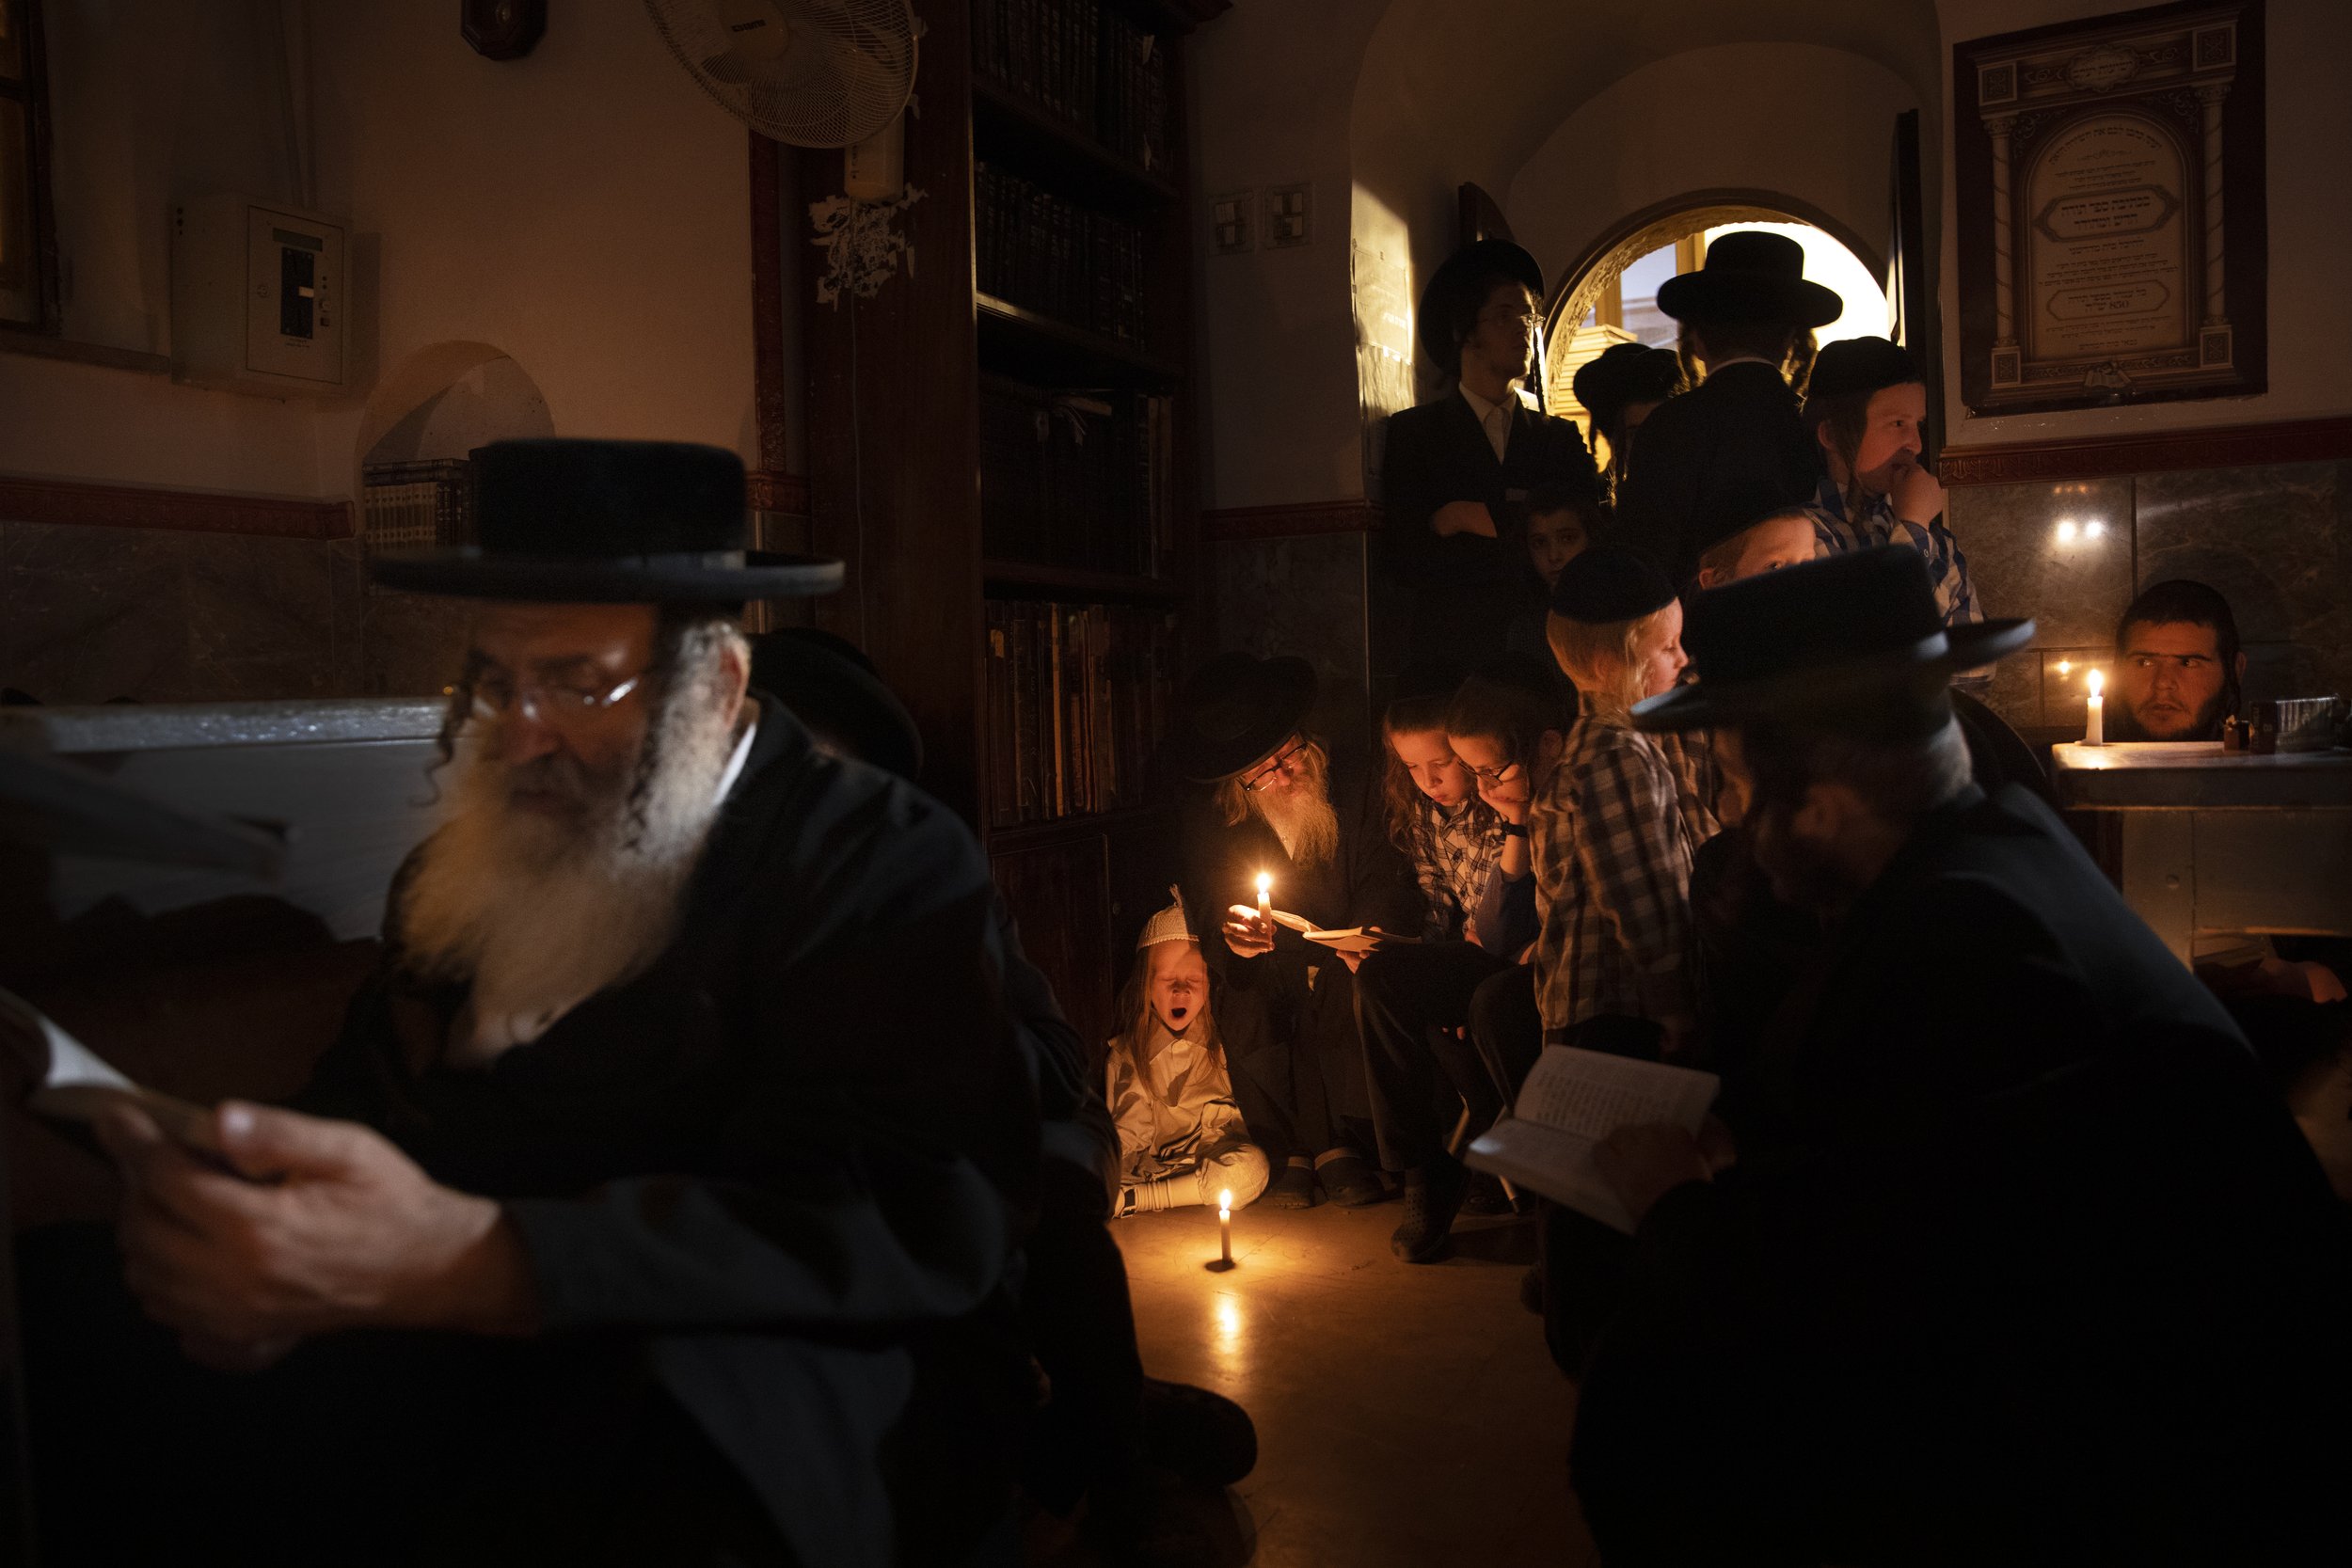  Ultra-Orthodox Jewish men and children read by candle light from the book of Eicha (Book of Lamentations) during the annual Tisha B'Av (Ninth of Av) fasting and memorial day, commemorating the destruction of ancient Jerusalem temples, in the Ultra-O